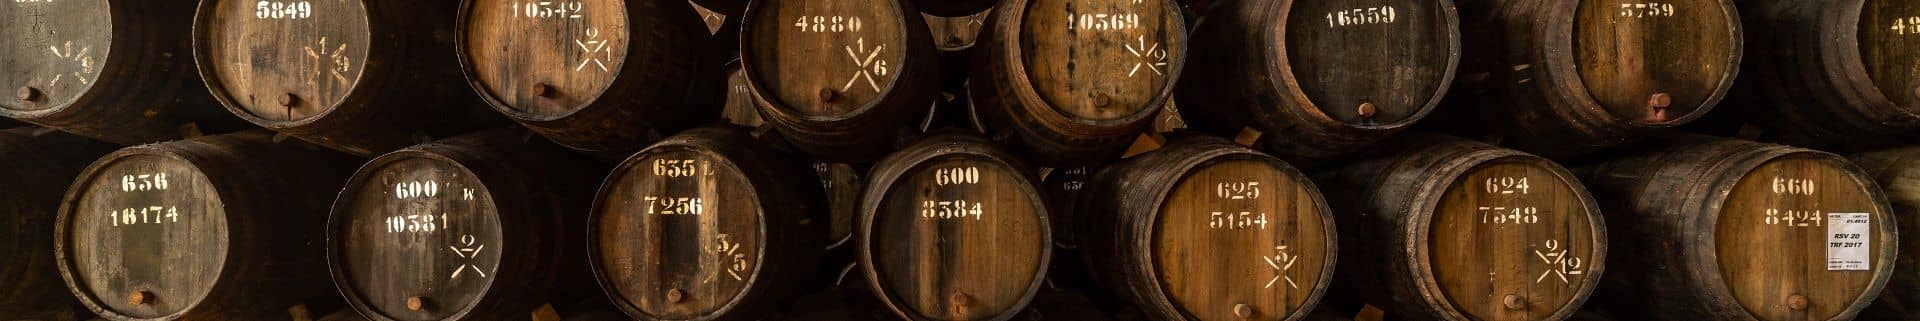 Taylor Fladgate Port wine cellars in the heart of the historic area of Vila Nova de Gaia, across the river from the old city centre of Oporto,...